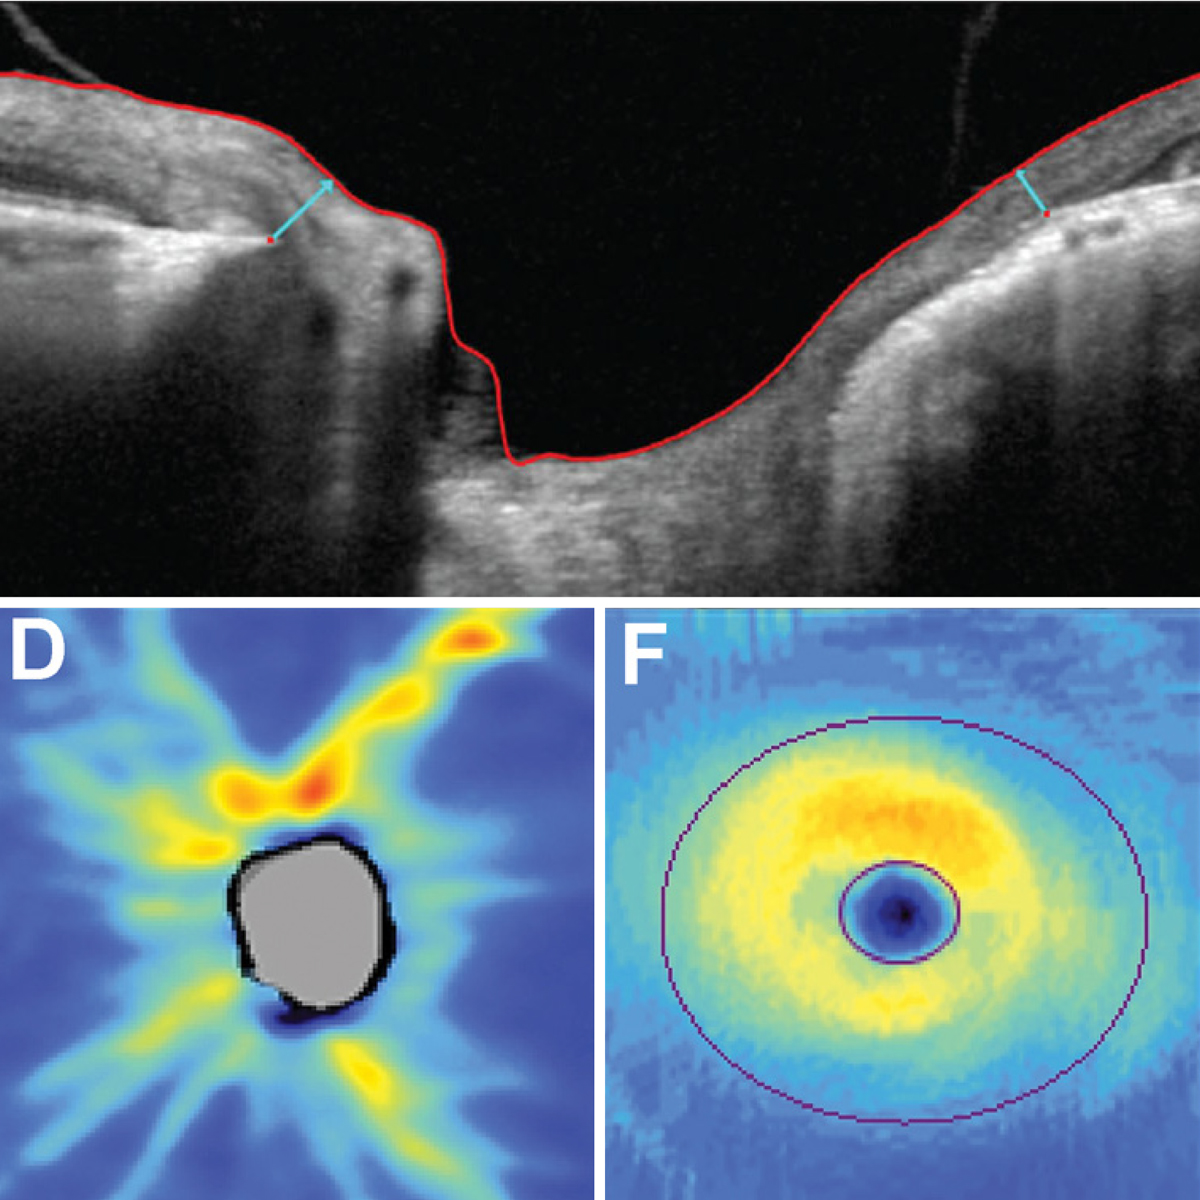 RNFLT may be more useful than MRW in early glaucoma assessment because of its previously reported lower variability and reduced sensitivity to intraocular pressure changes.